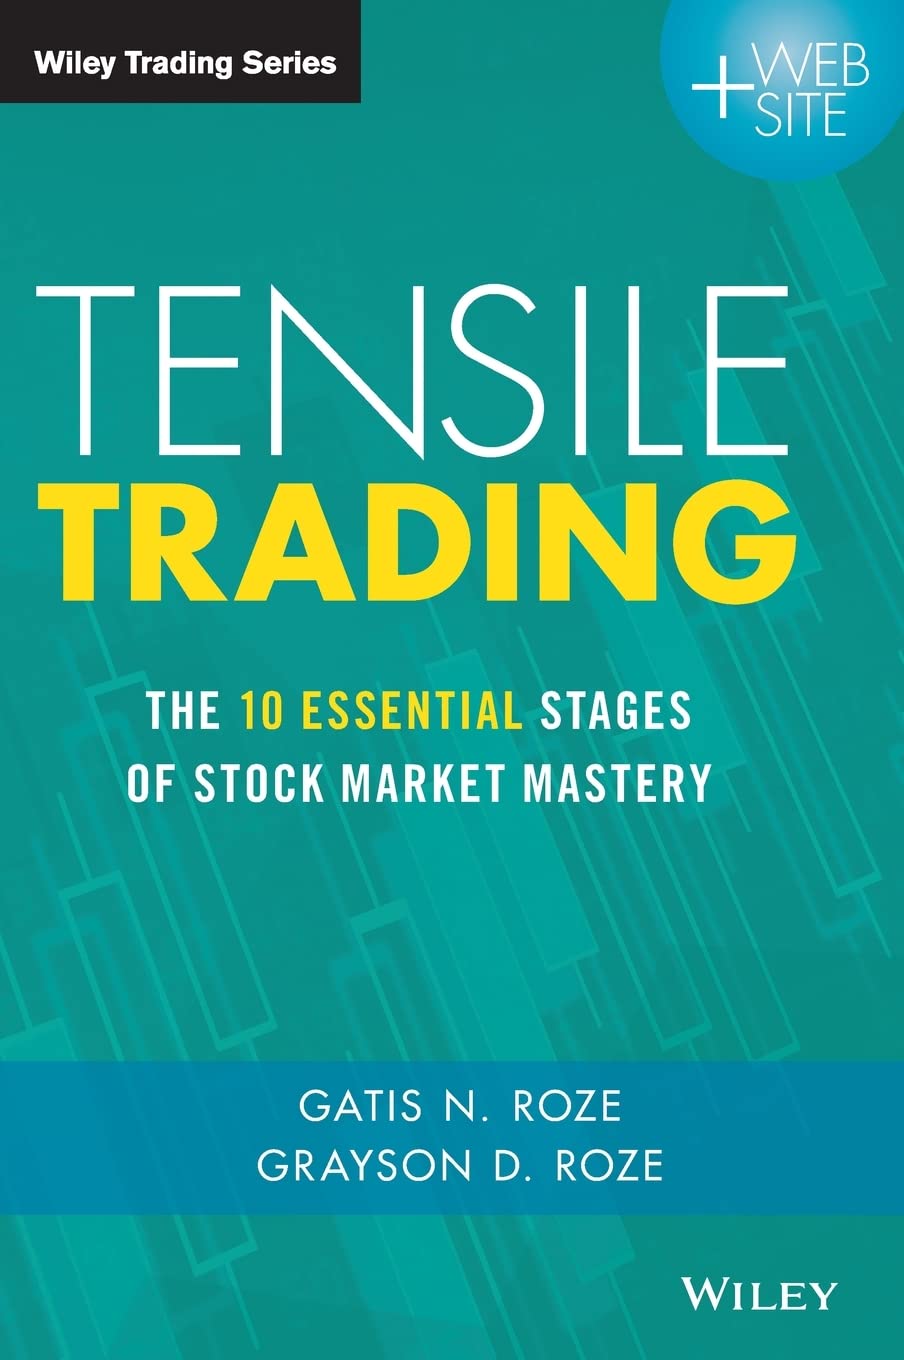 Tensile Trading: The 10 Essential Stages of Stock Market Mastery (Wiley Trading)